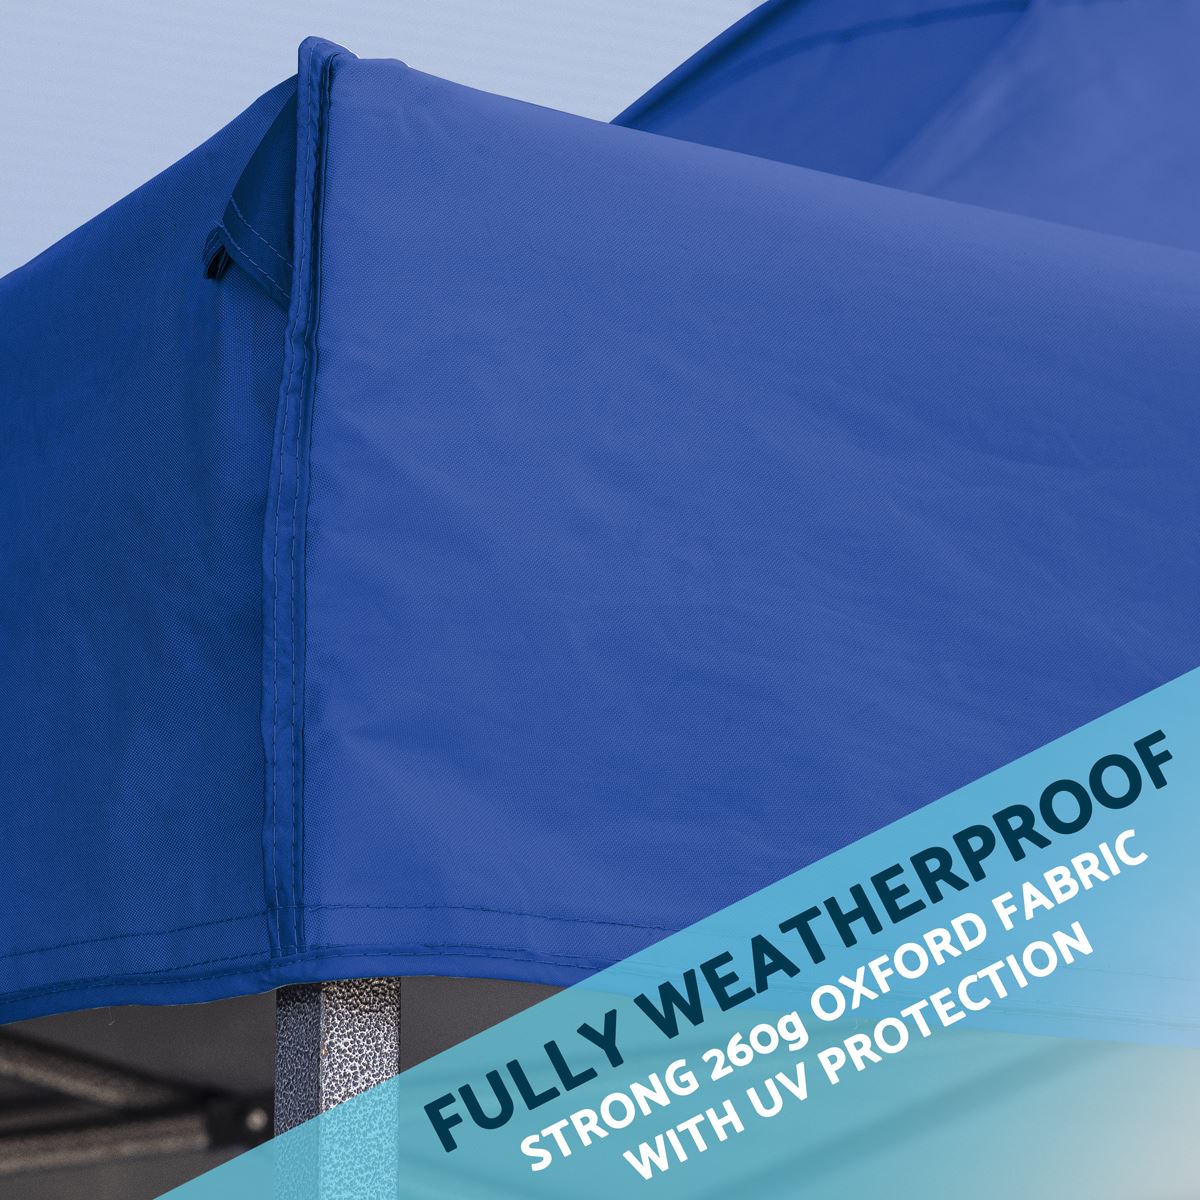 Dellonda Premium 2x2m Pop-Up Gazebo & Side Walls, PVC Coated, Water Resistant Fabric, Supplied with Carry Bag, Rope, Stakes & Weight Bags - Blue